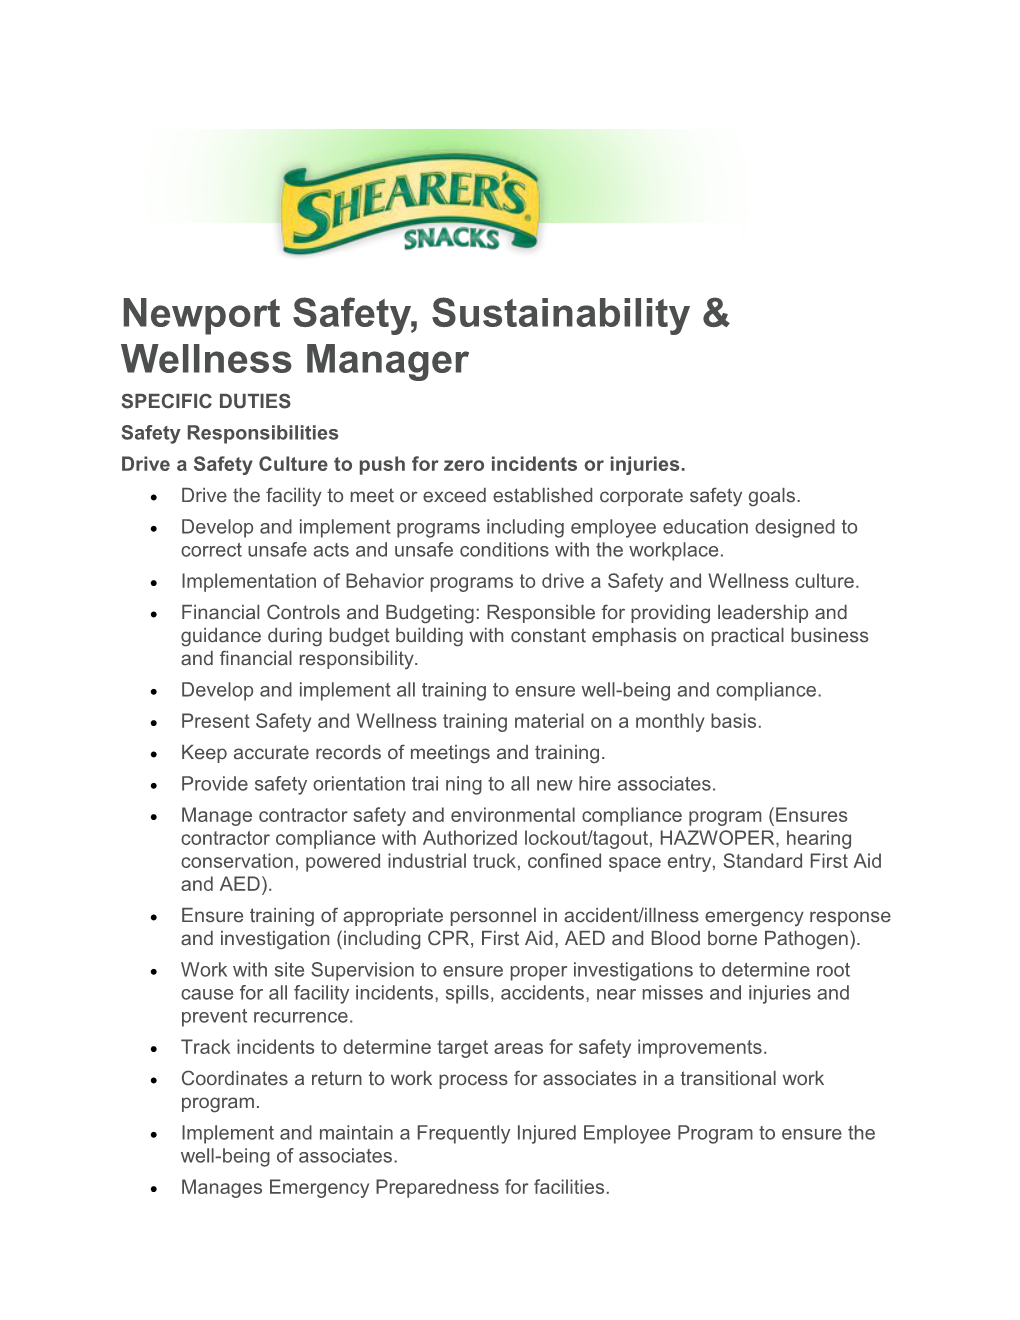 Newport Safety, Sustainability & Wellness Manager